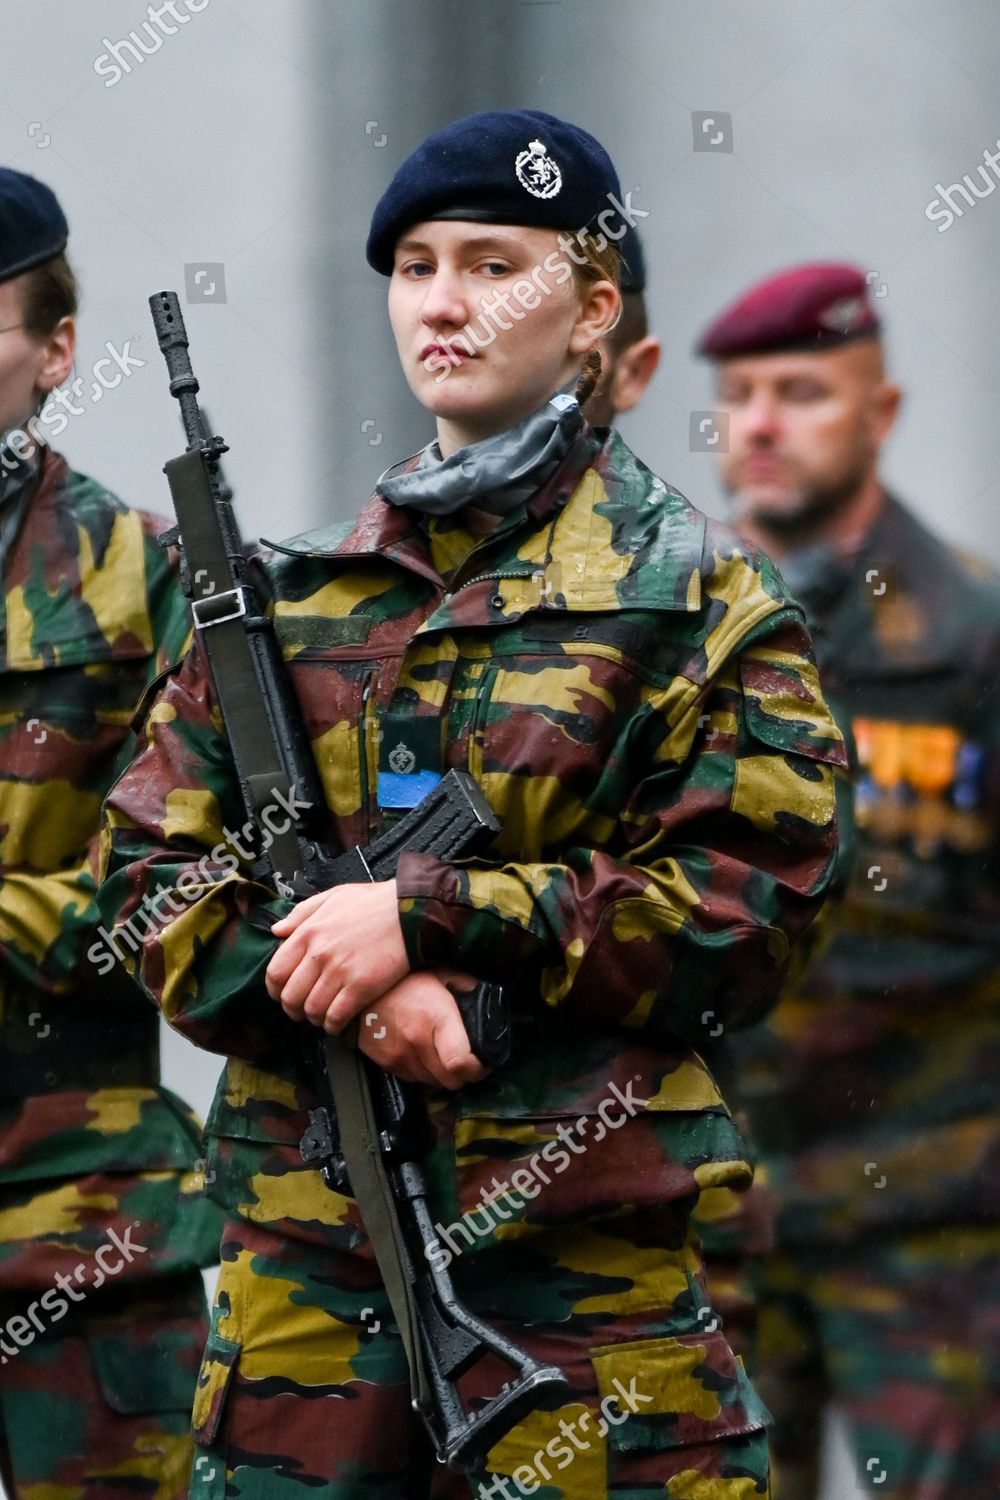 CASA REAL BELGA - Página 27 Belgian-royals-attend-ceremony-for-the-presentation-of-the-blue-berets-royal-military-academy-erm-brussels-belgium-shutterstock-editorial-10790437au